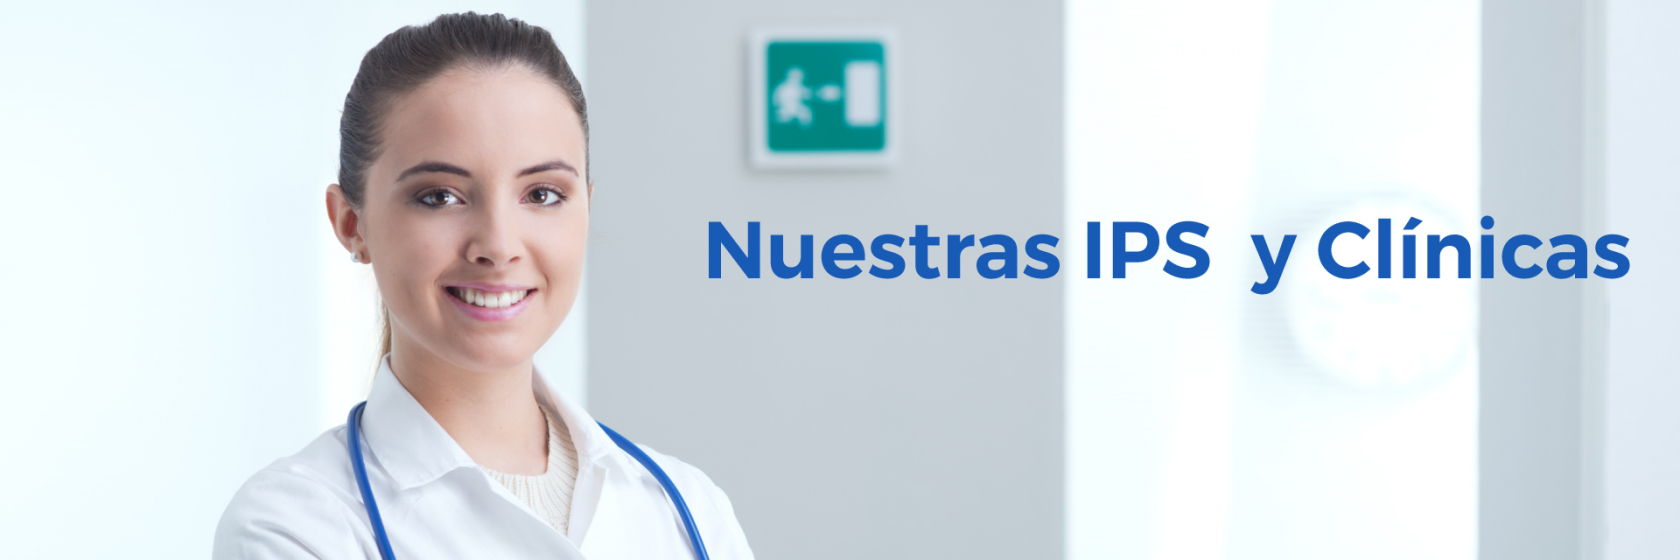 Banner ips y clinicas